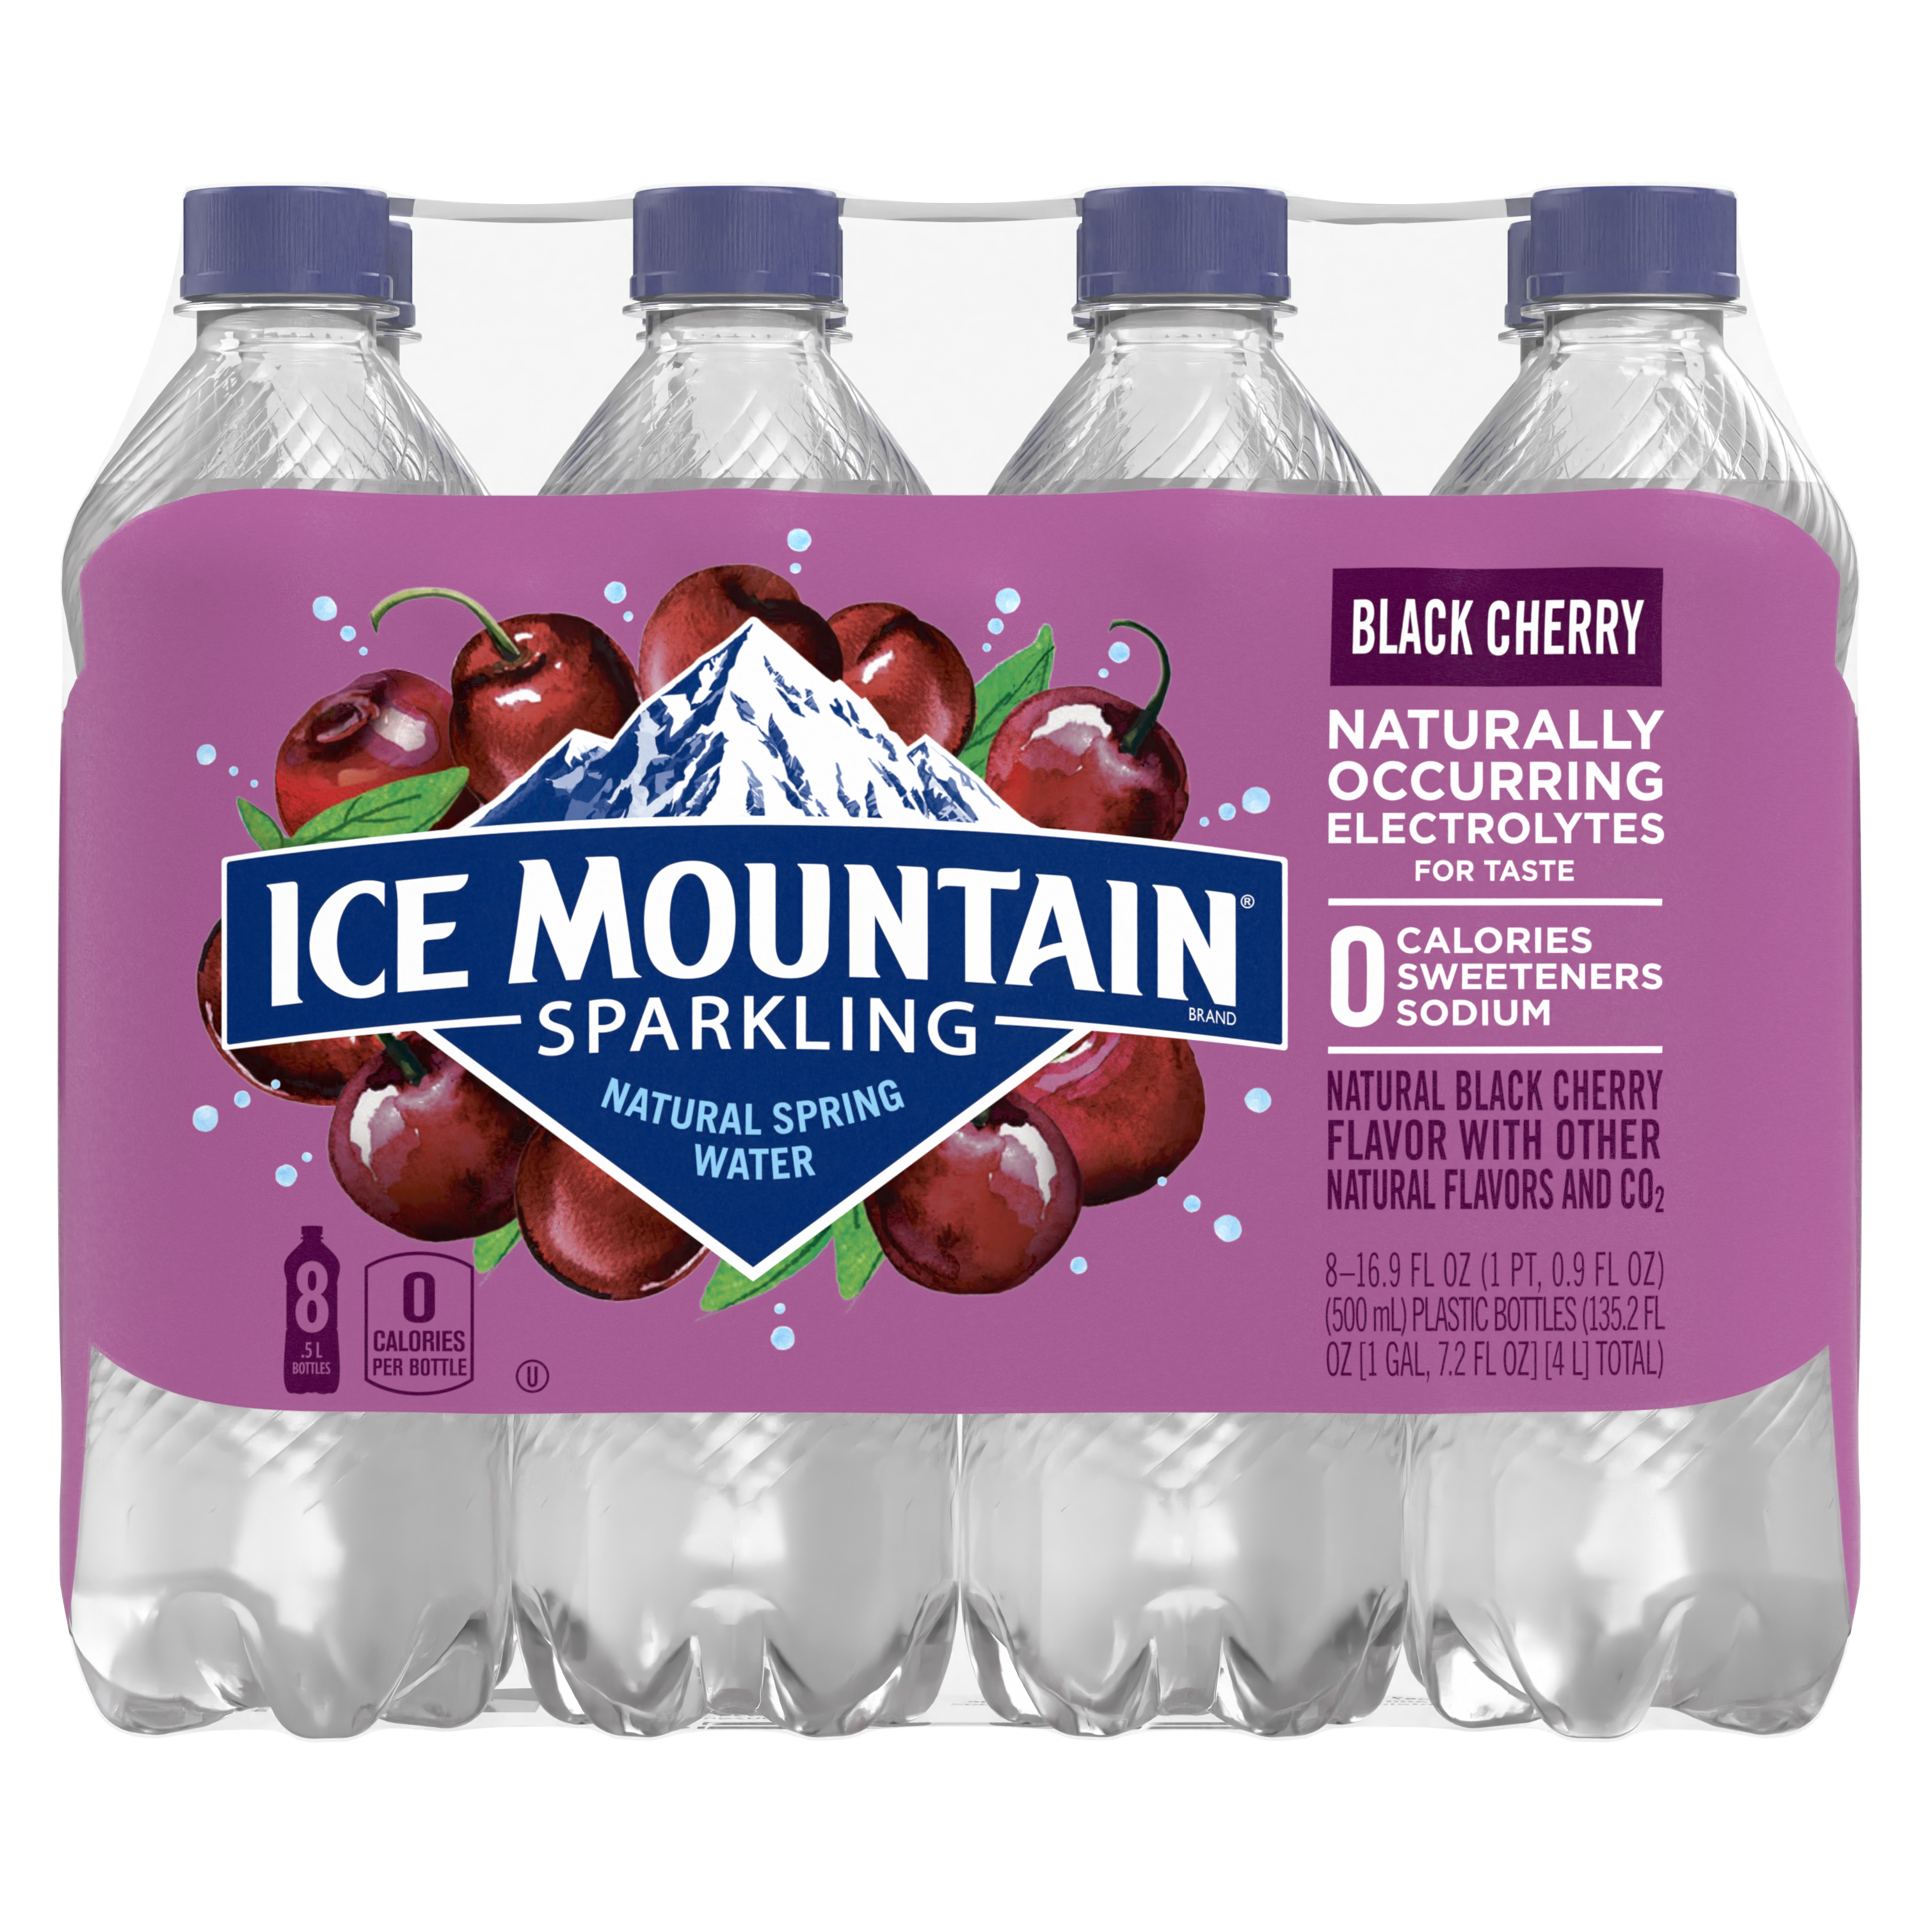 slide 2 of 5, Ice Mountain Brand Sparkling Natural Spring Water, Black Cherry, 16.9 oz